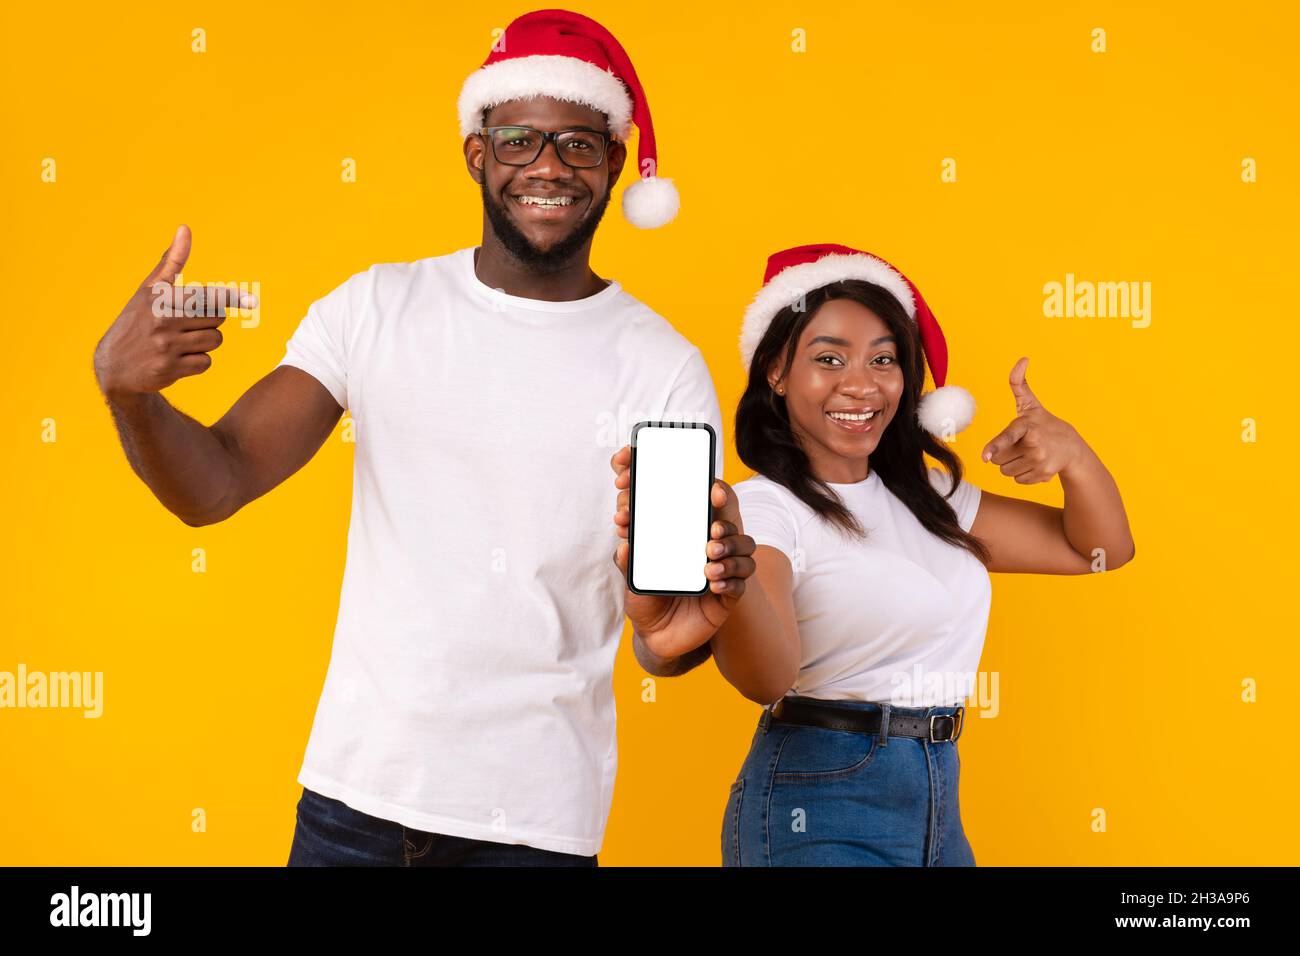 Black Couple Wearing Santa Hats Showing Cellphone Screen, Yellow Background Stock Photo